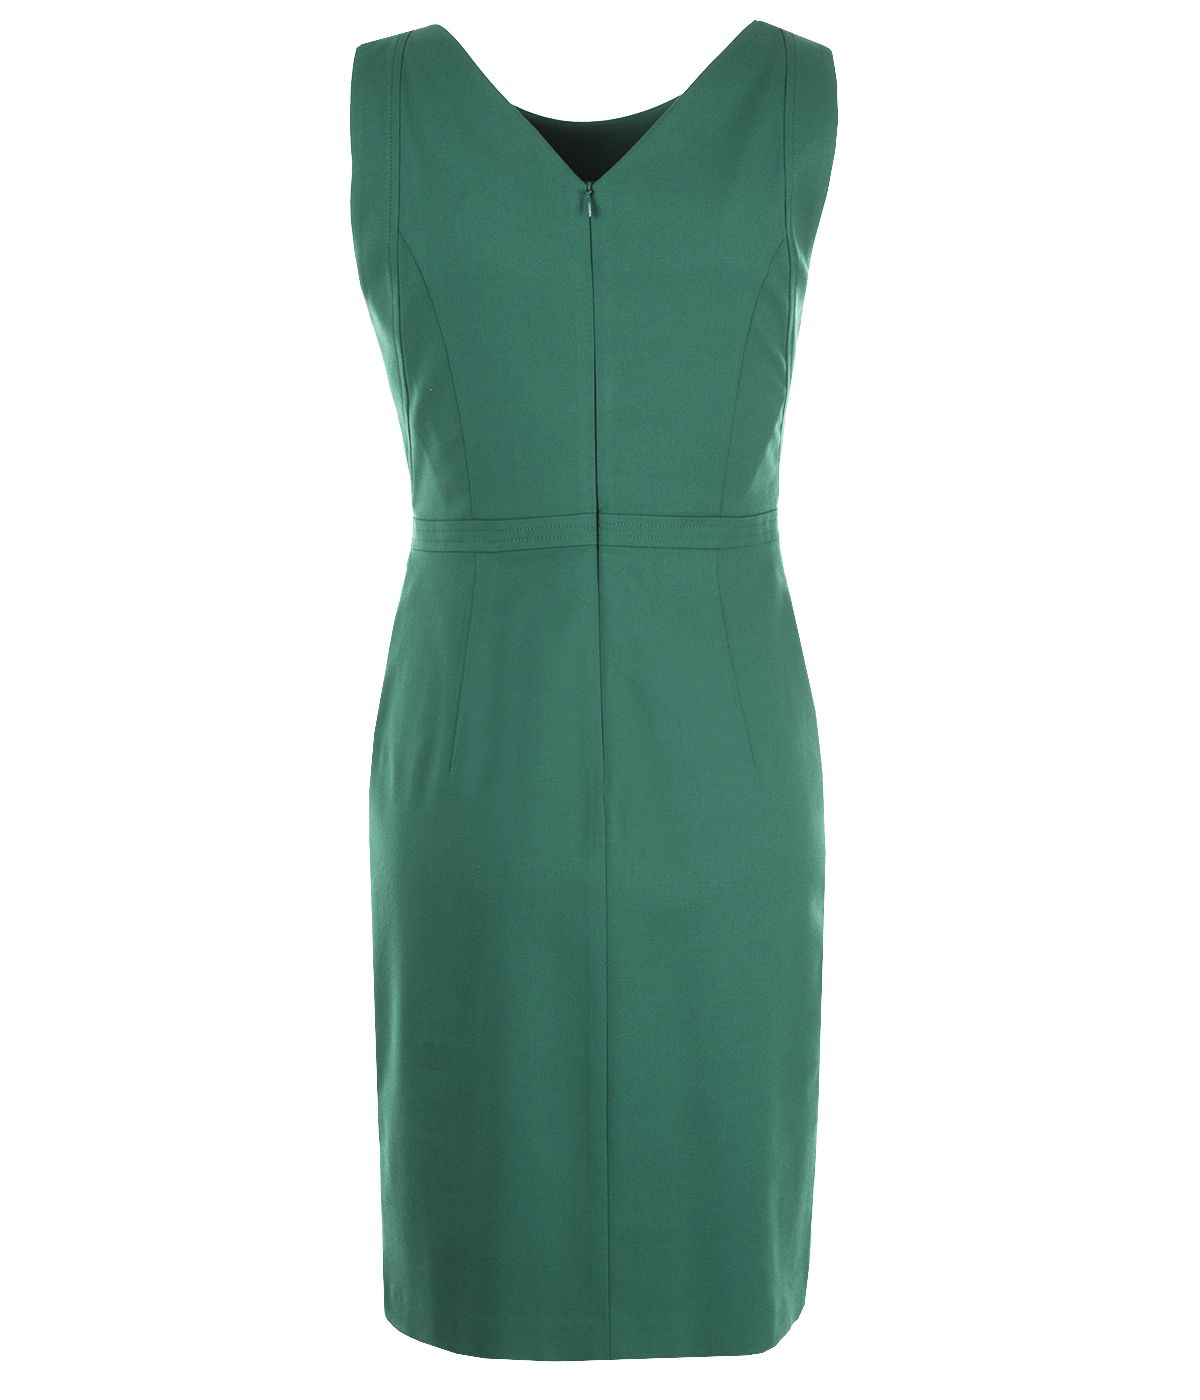 Fitted, sleeveless dress with viscose 1